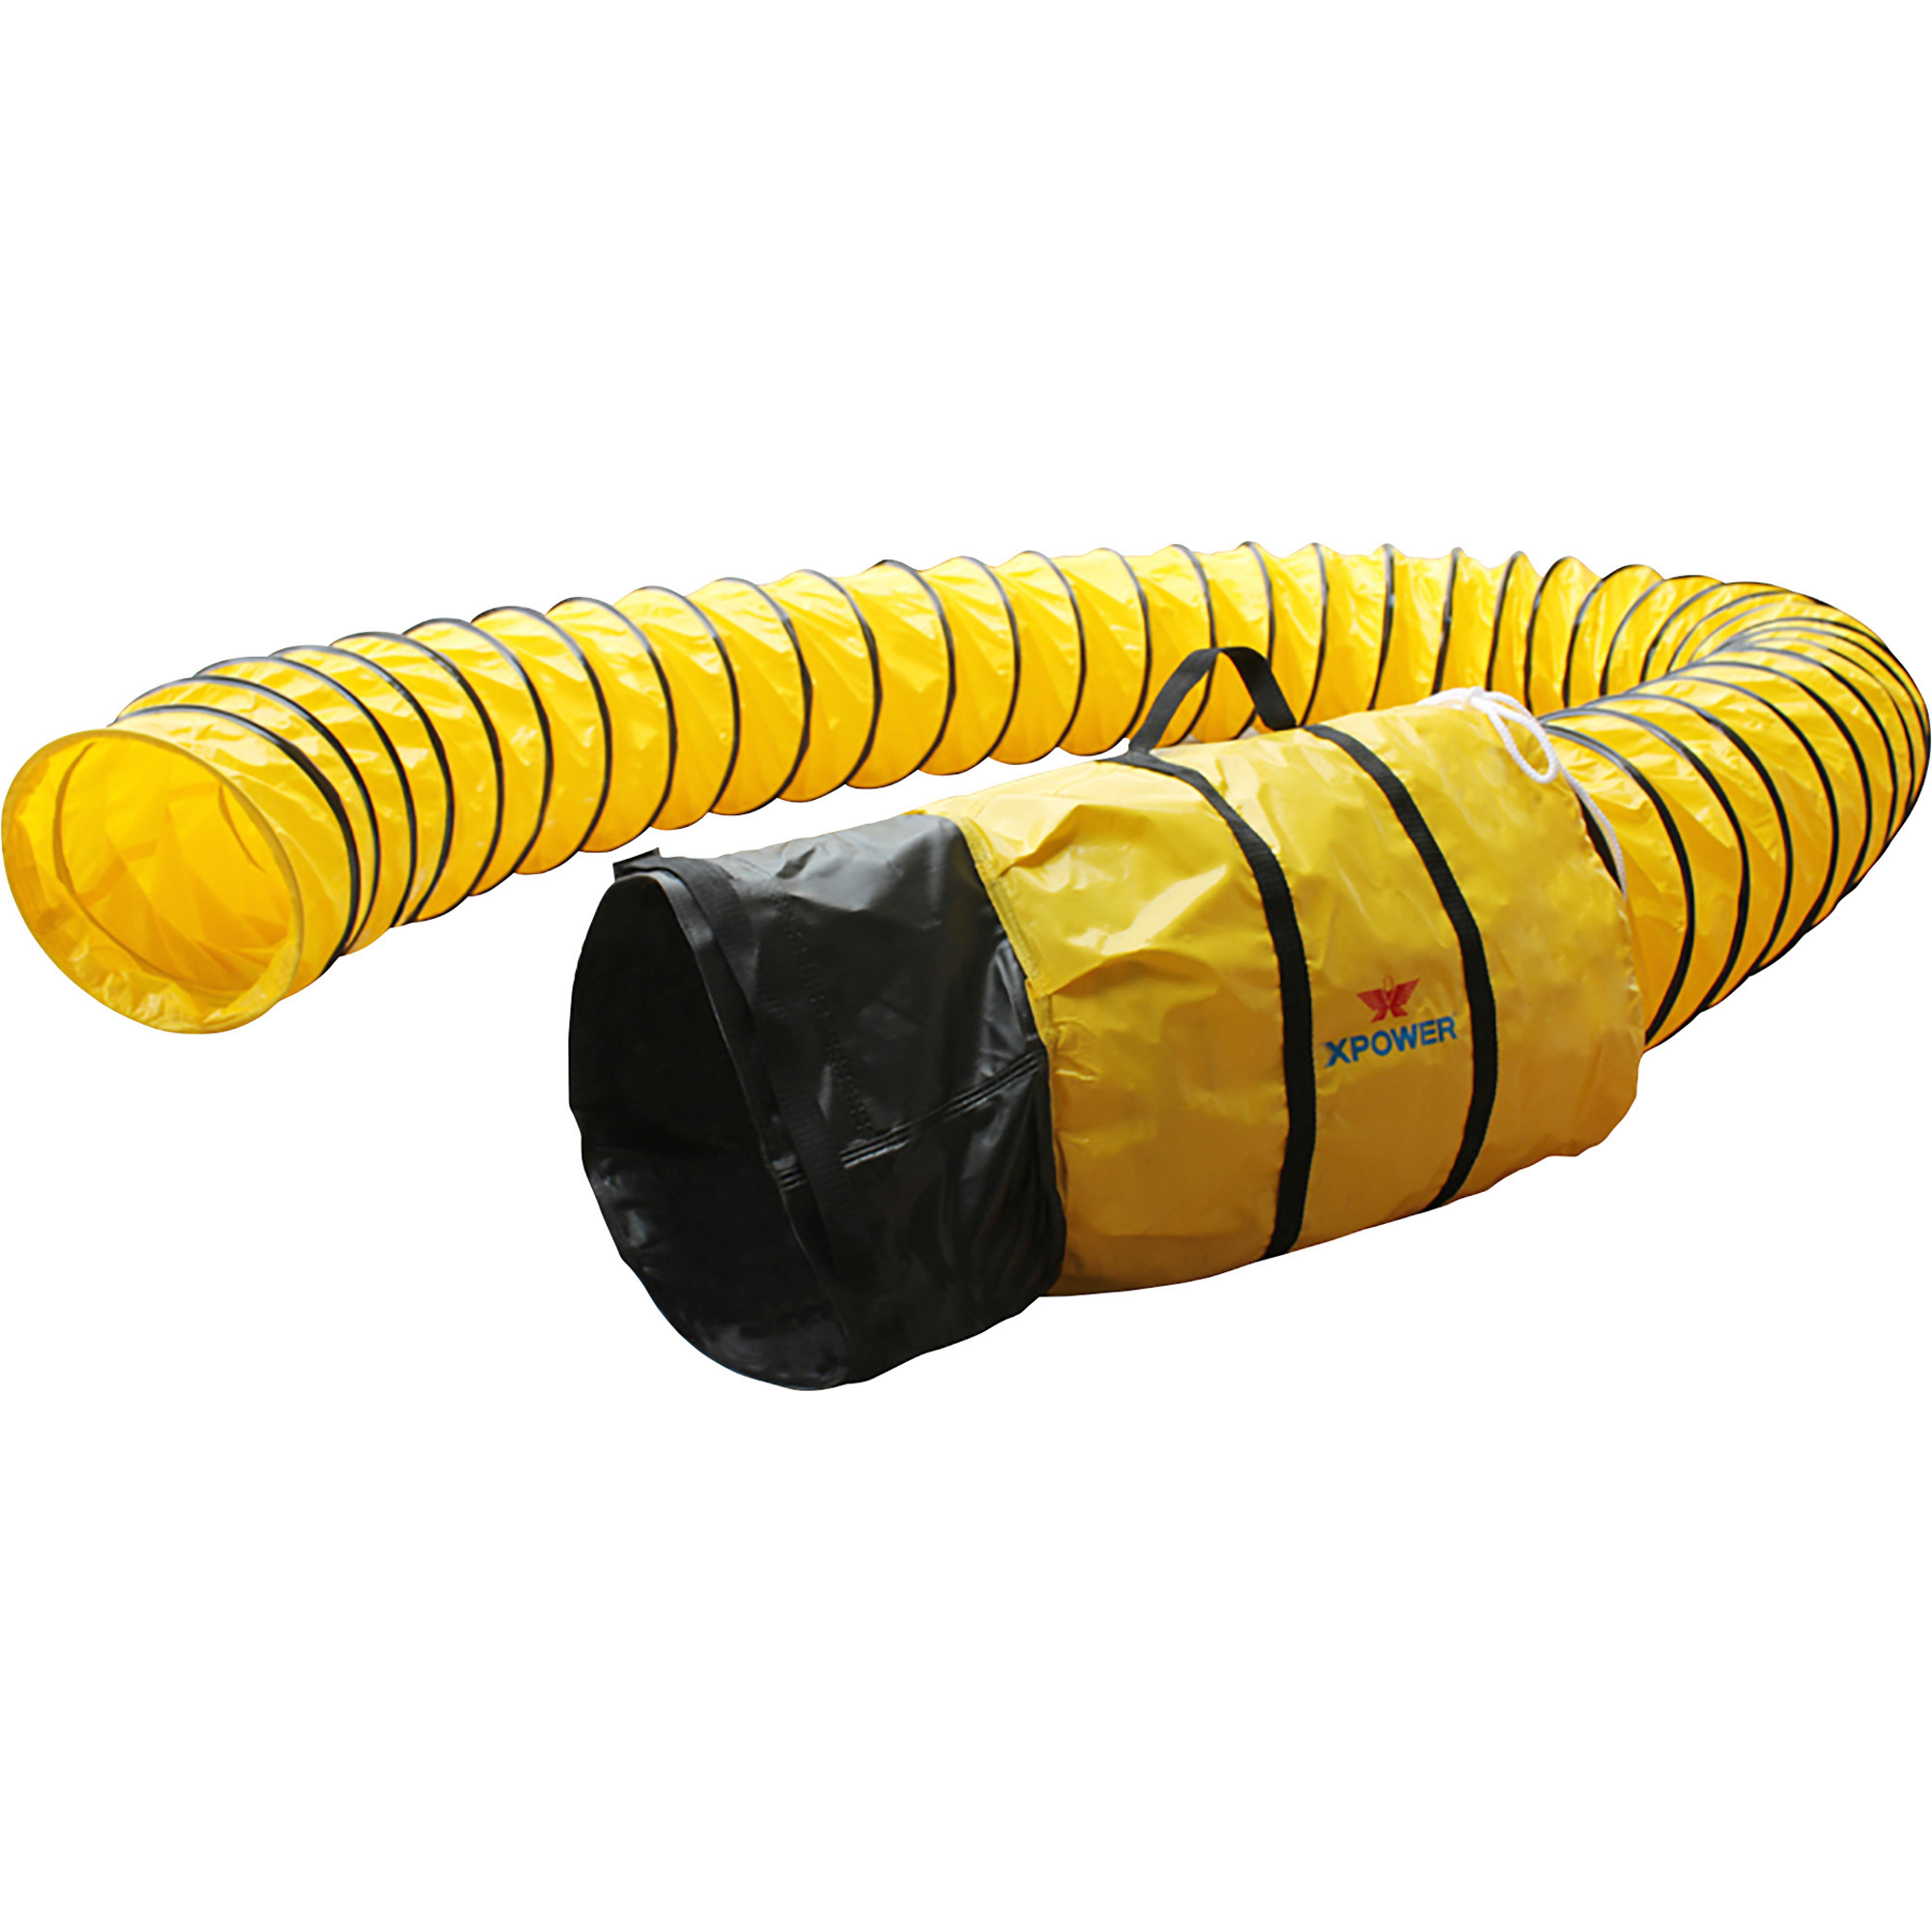 Ducting Hose — 12Inch Diameter x 25ft.L, Model - XPower 12DH25